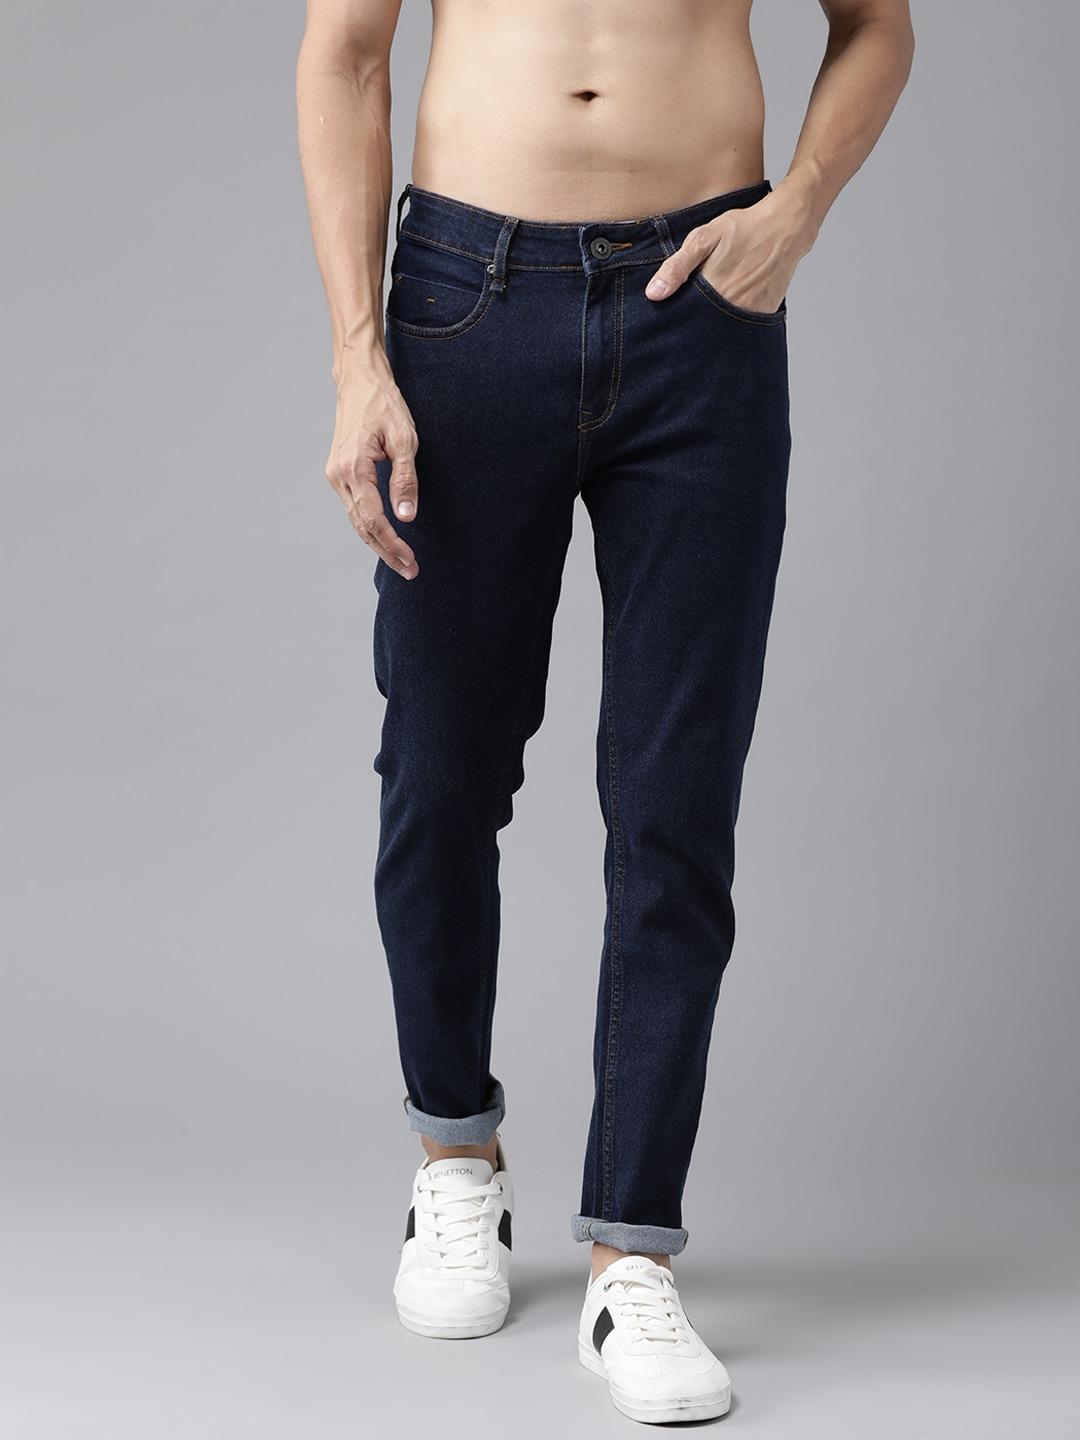 roadster-men-navy-blue-slim-tapered-fit-mid-rise-clean-look-stretchable-jeans